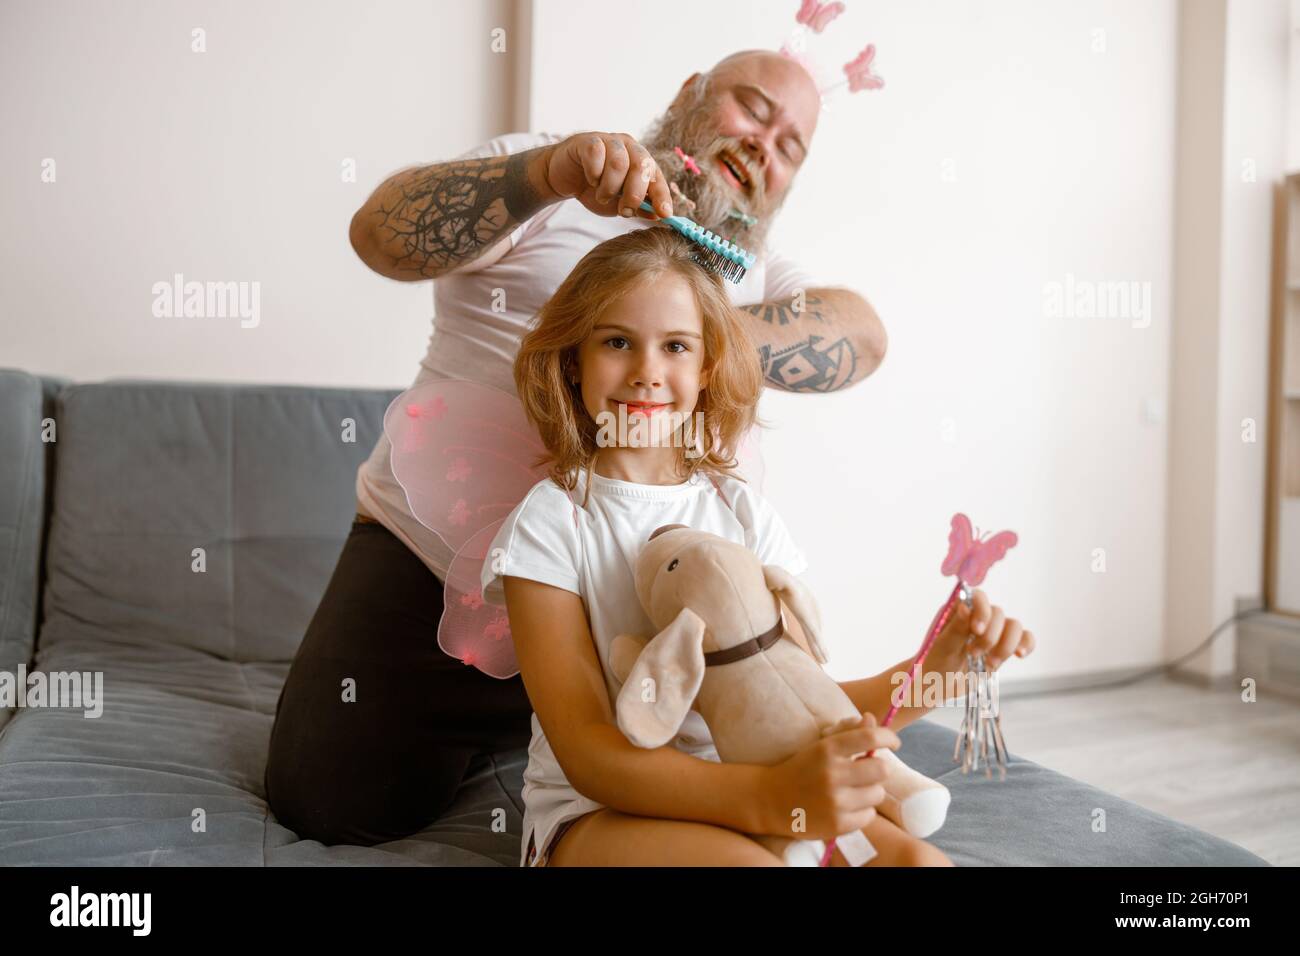 Smiling girl holds toy dog and magic stick while dad brushes her hair in room Stock Photo